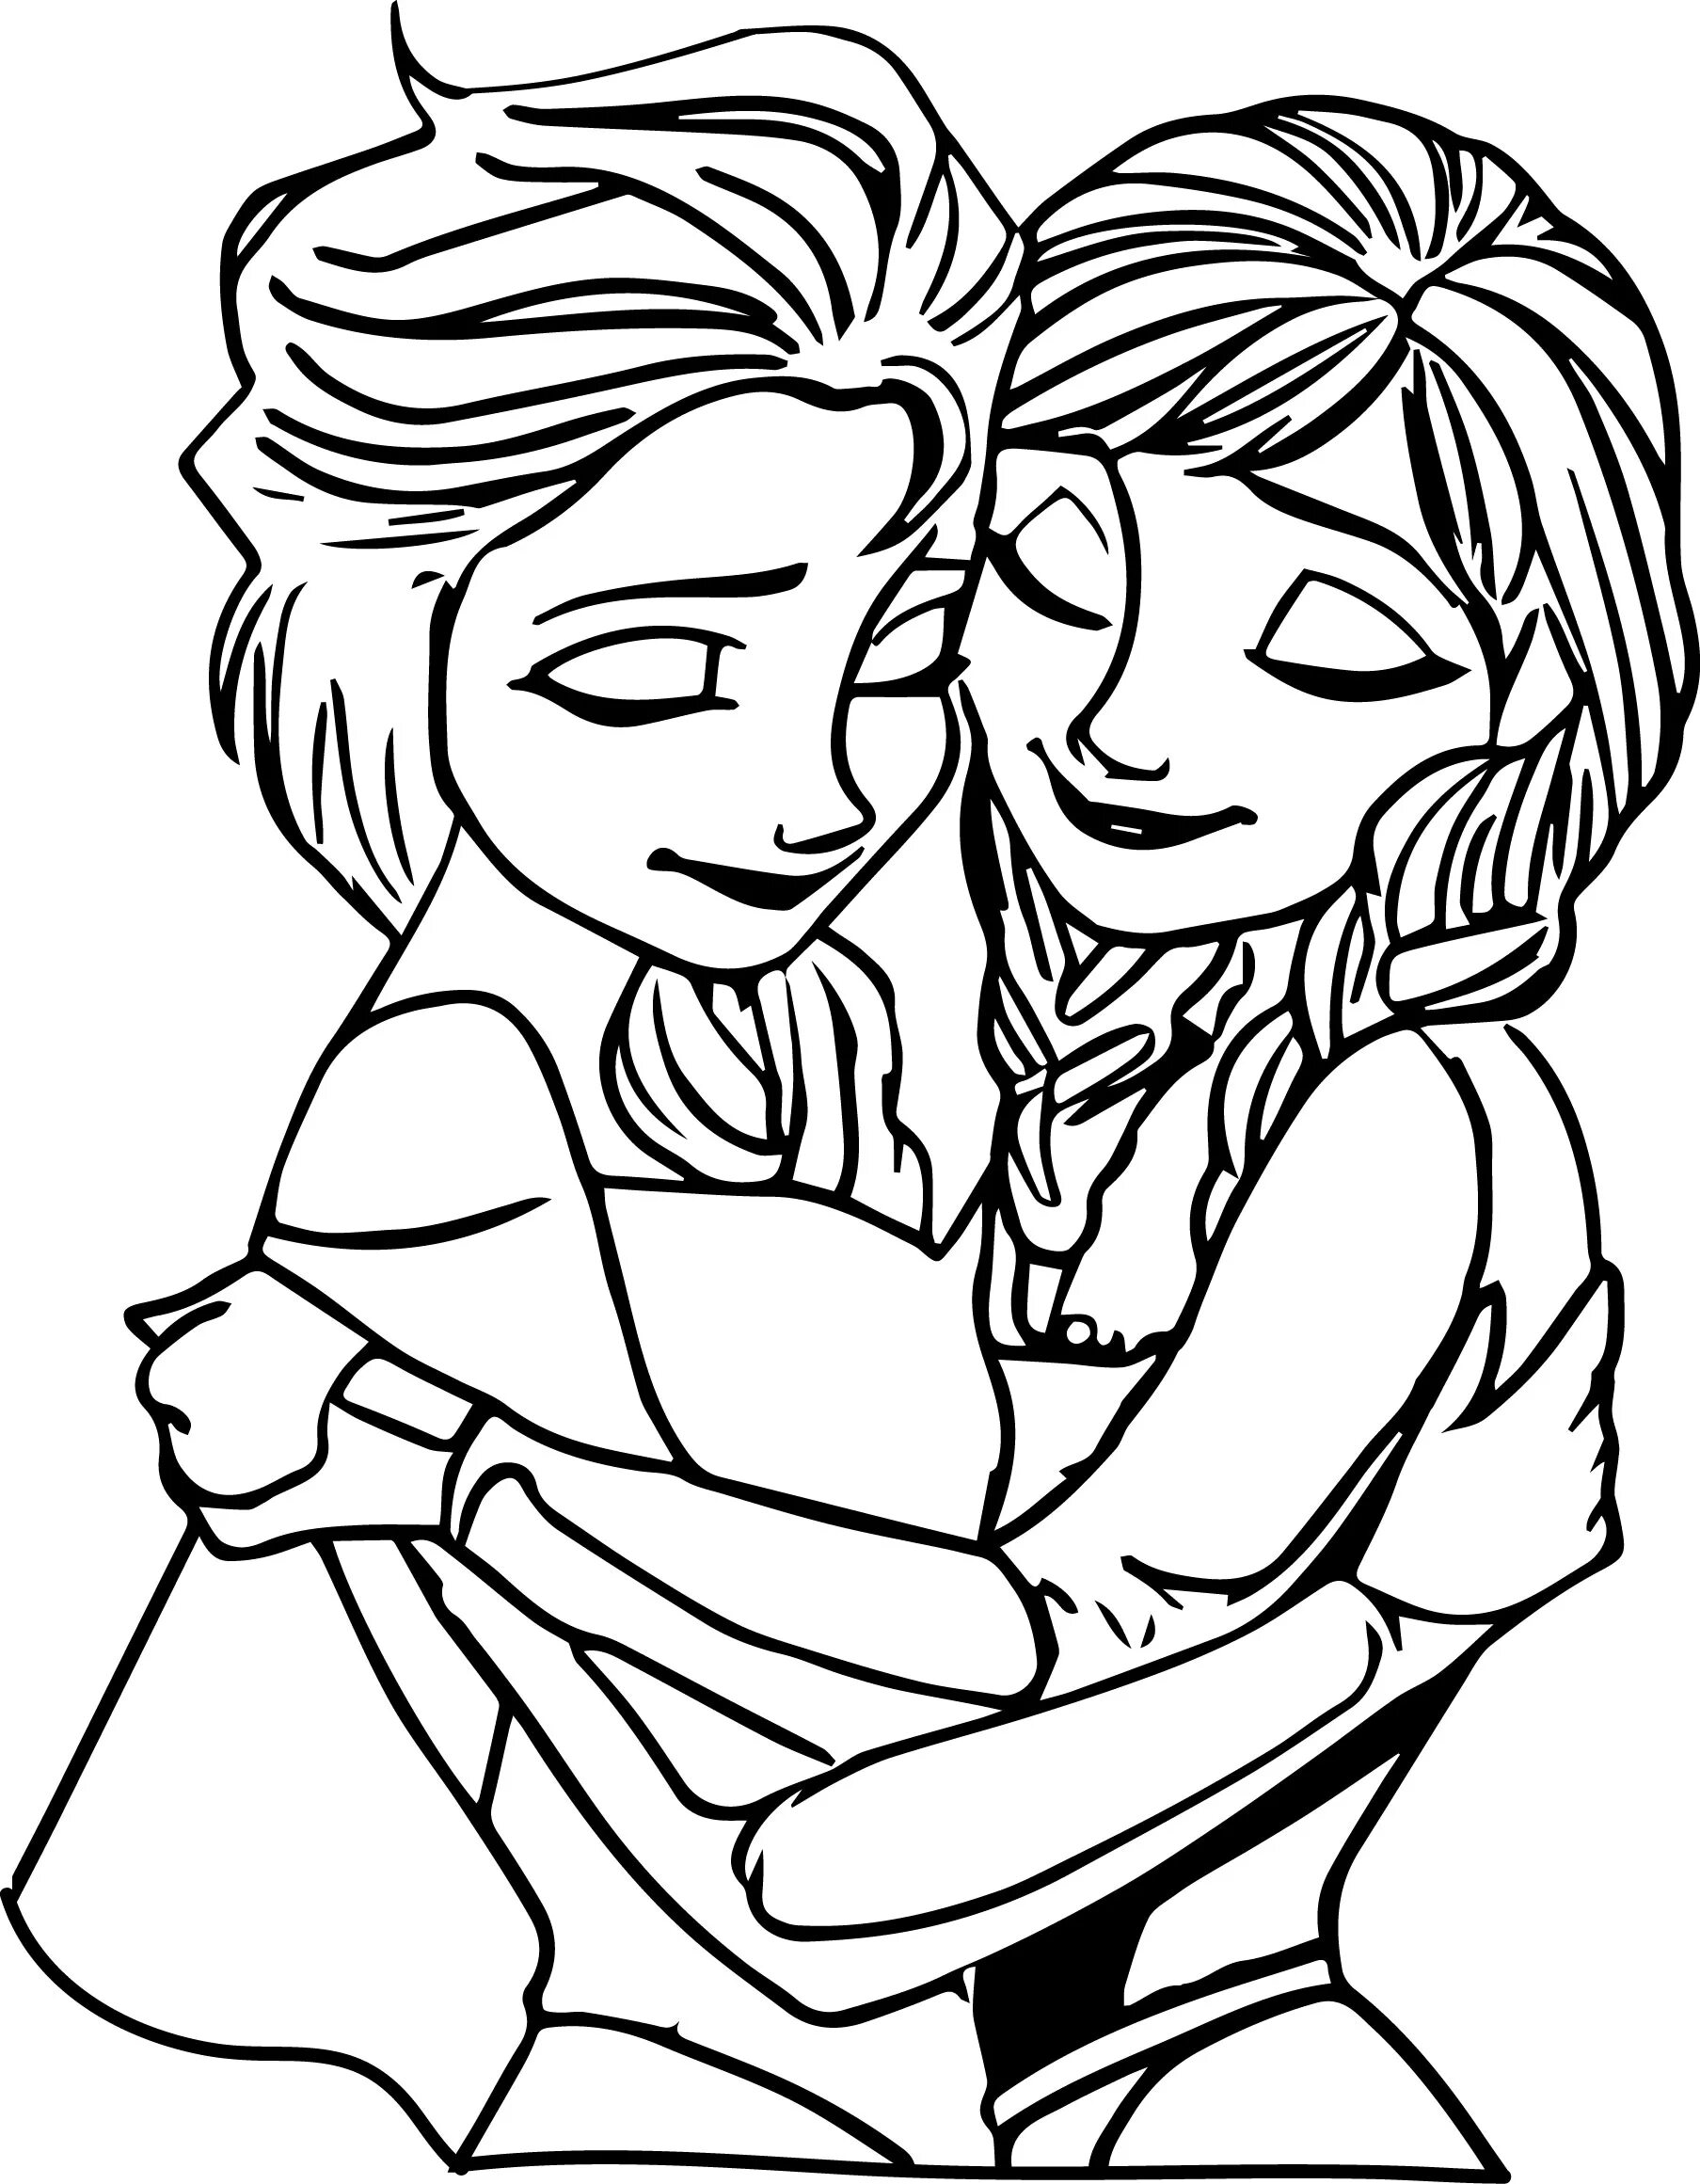 Coloring page two sisters in ecstasy